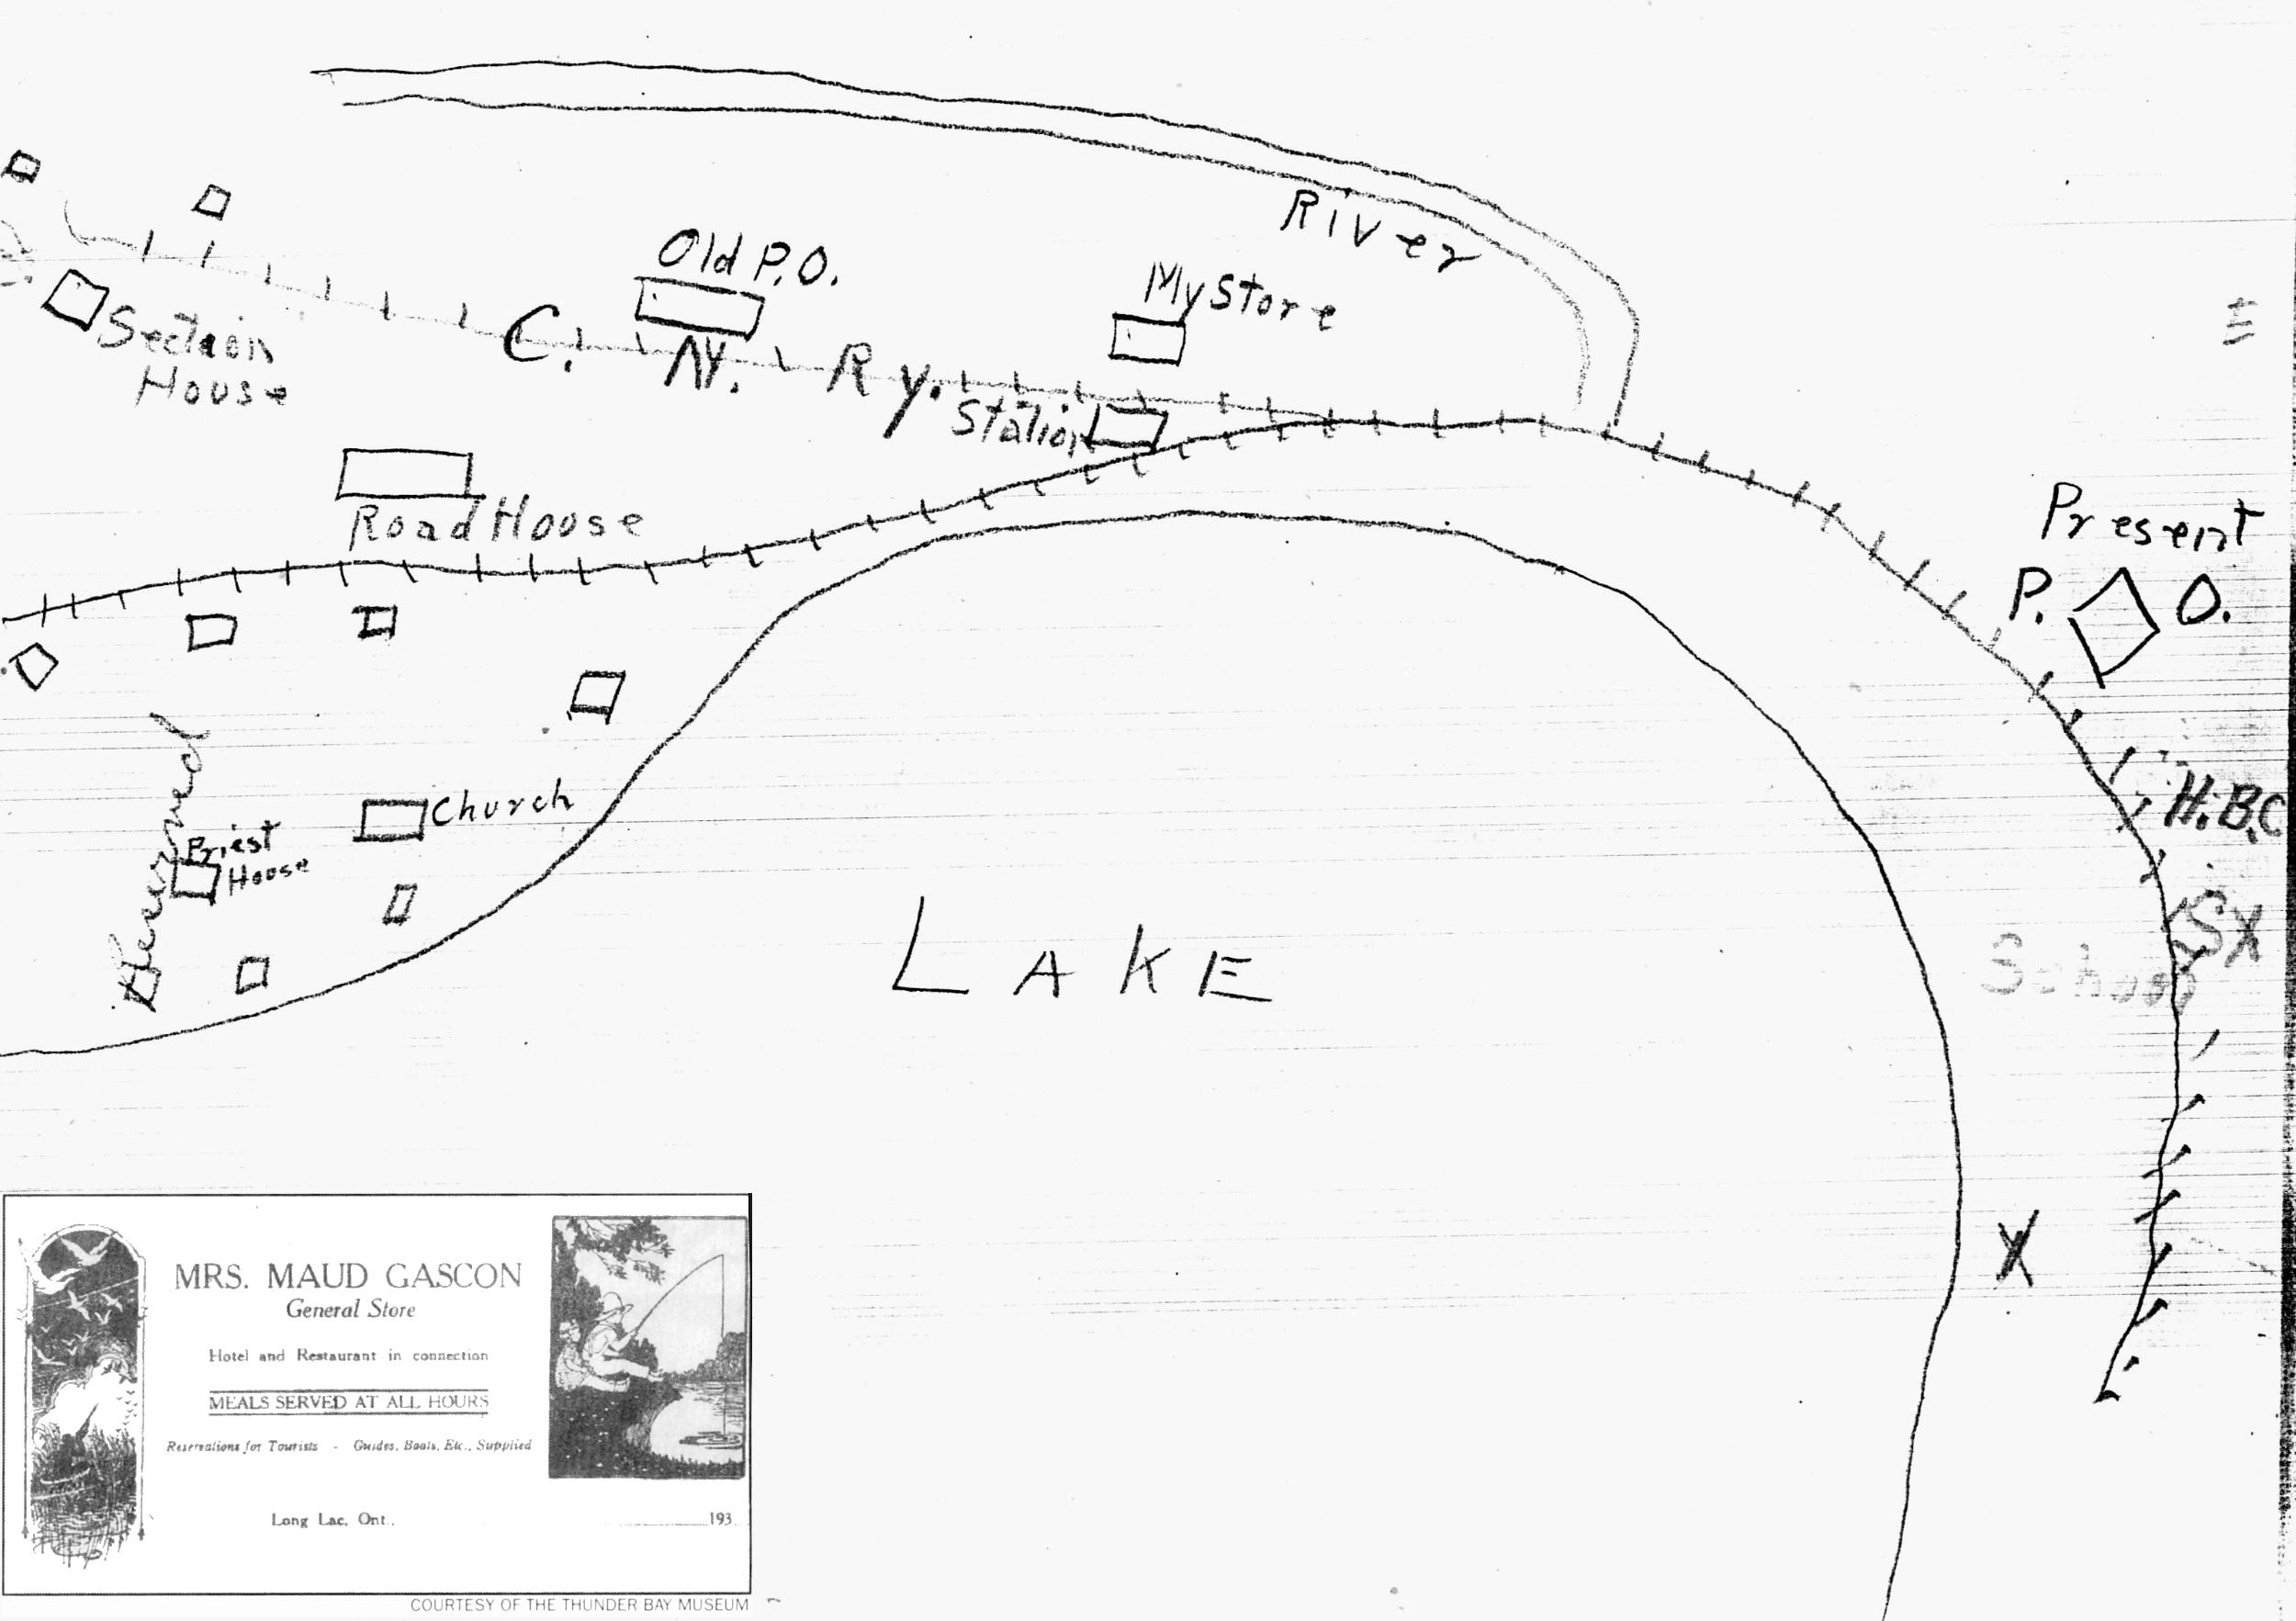 Map of downtown Longlac, drawn by Maud Gascon